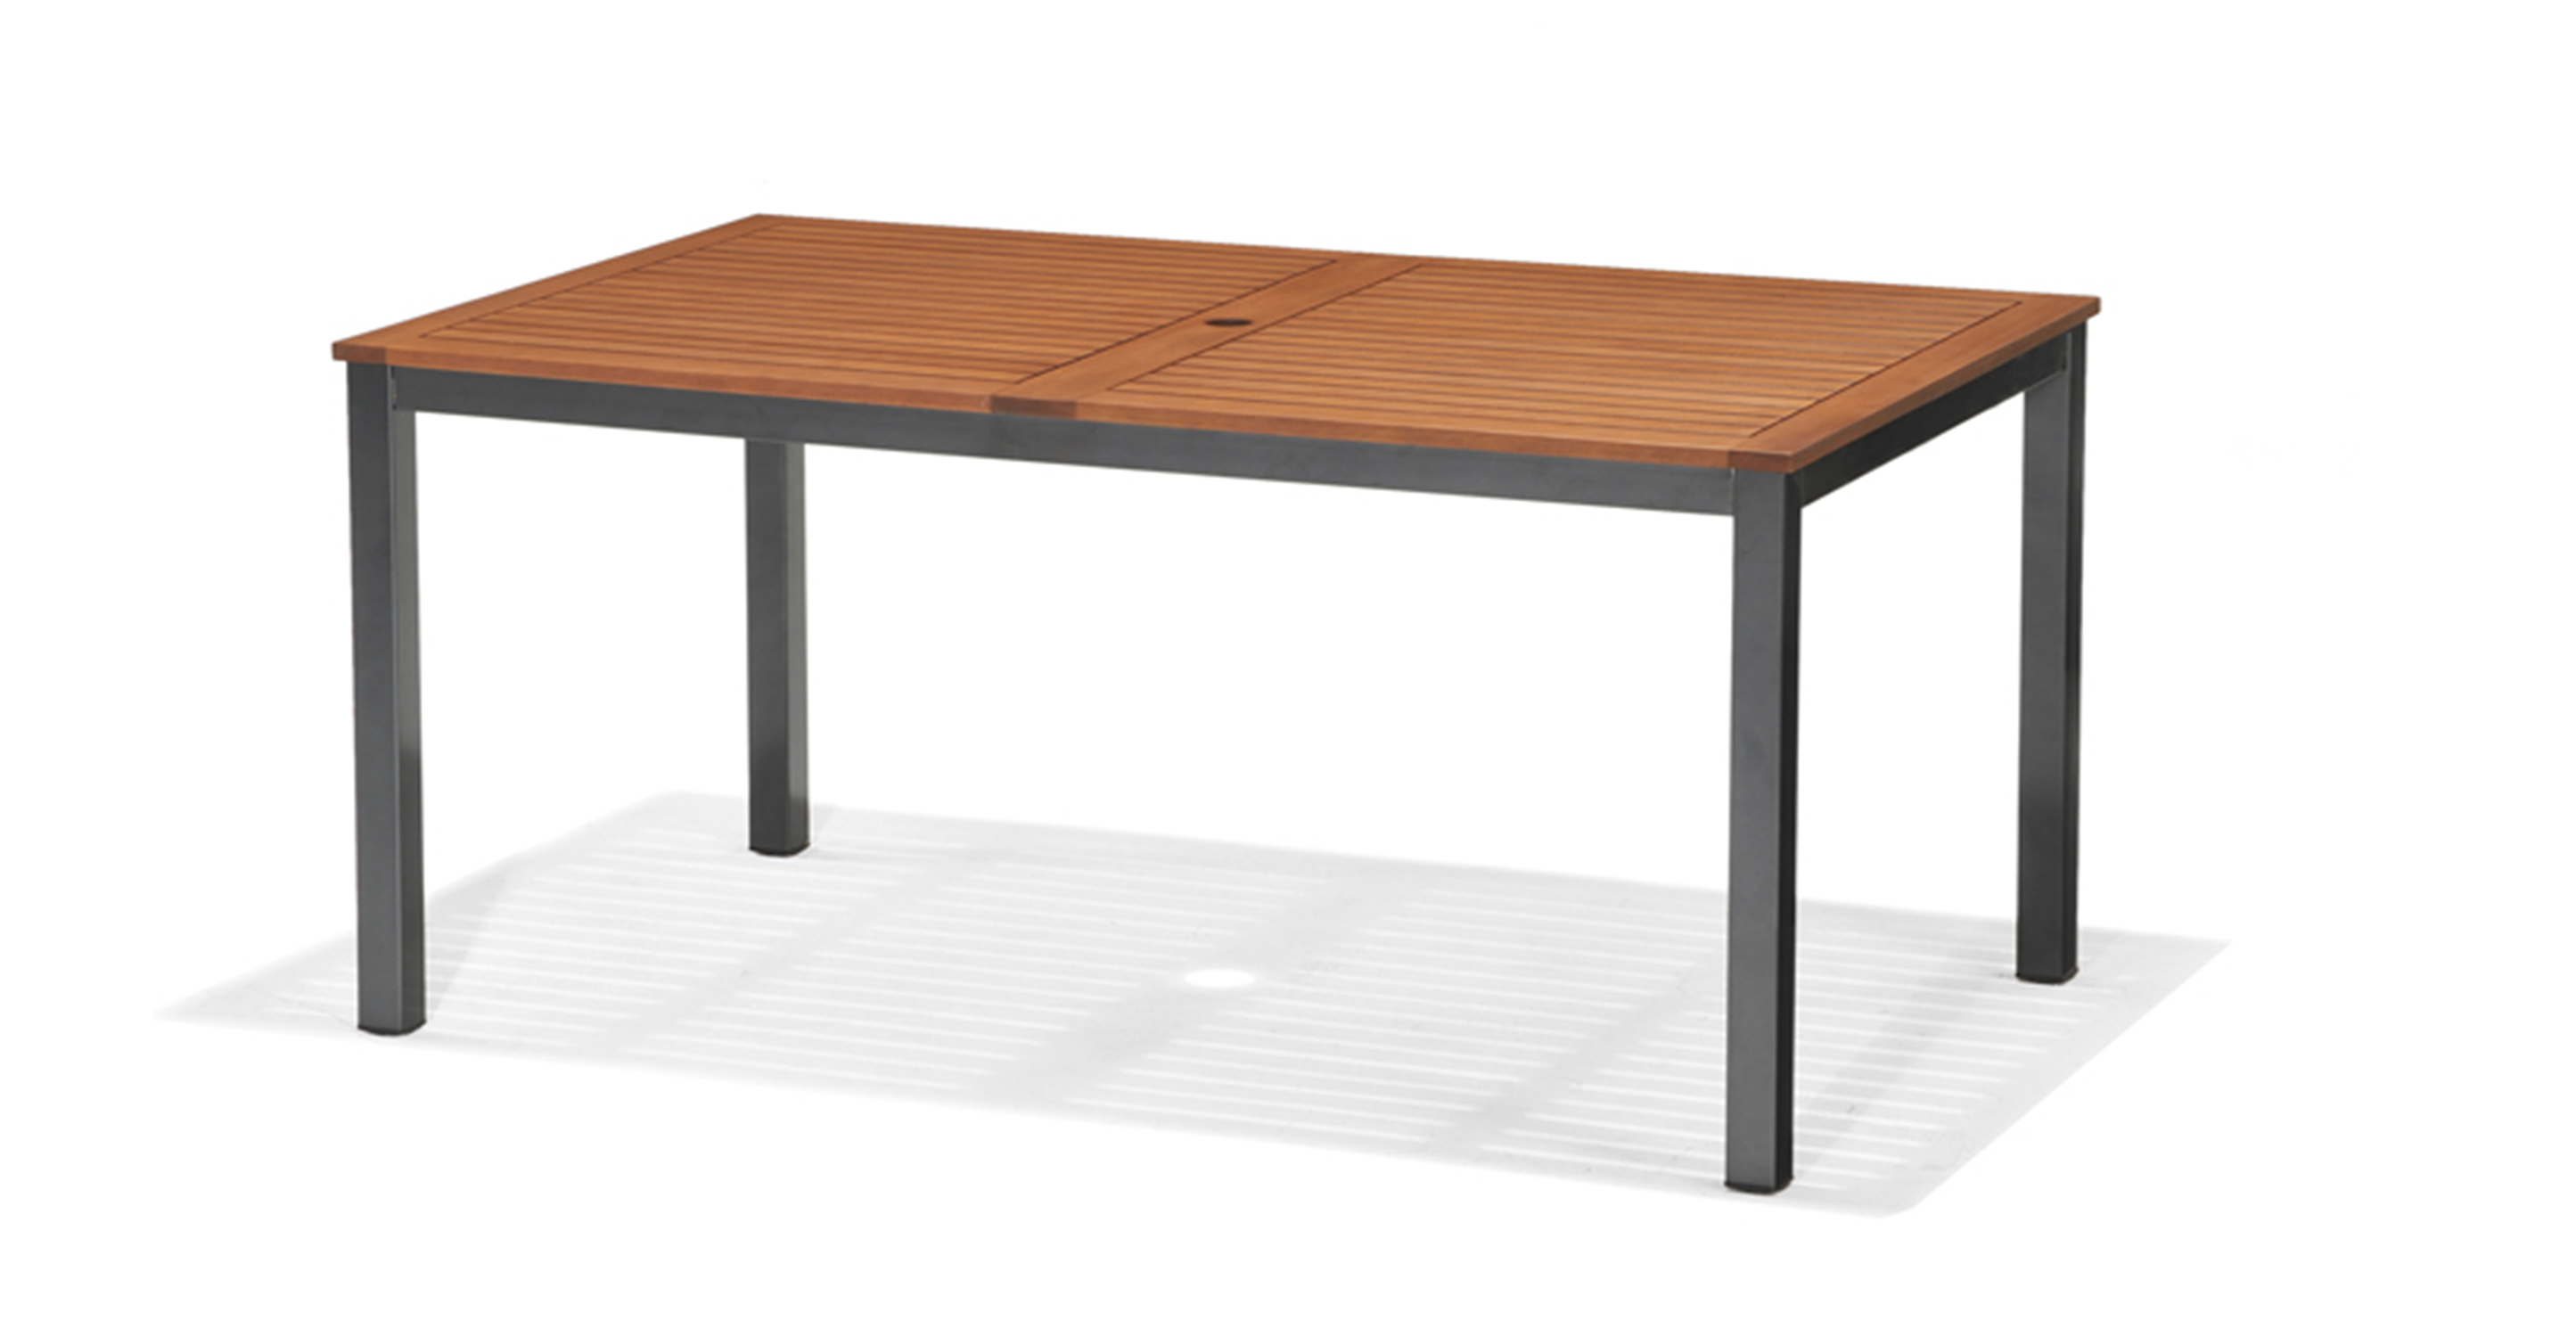 Ibis dining table